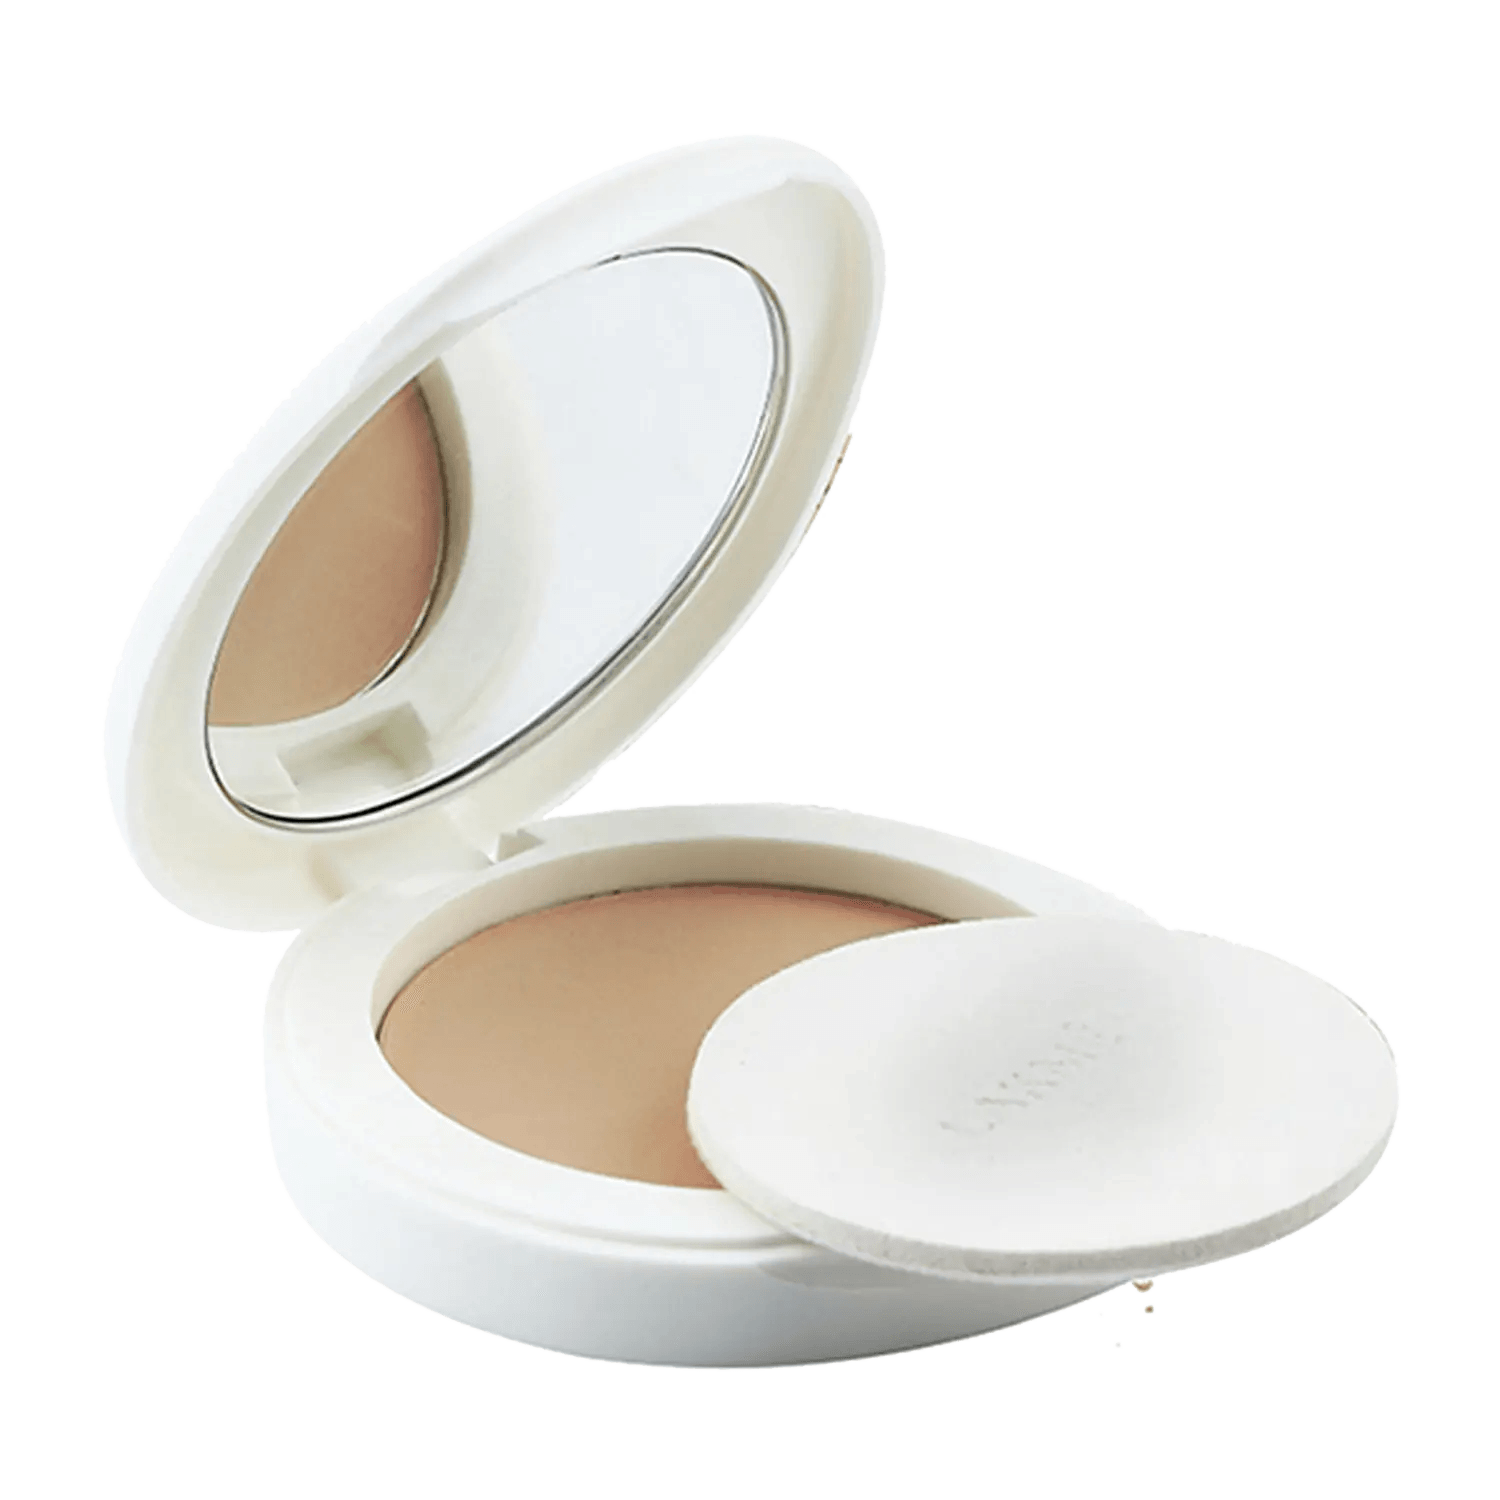 Lakme Perfect Radiance Compact - Beige Honey 05 (8g)